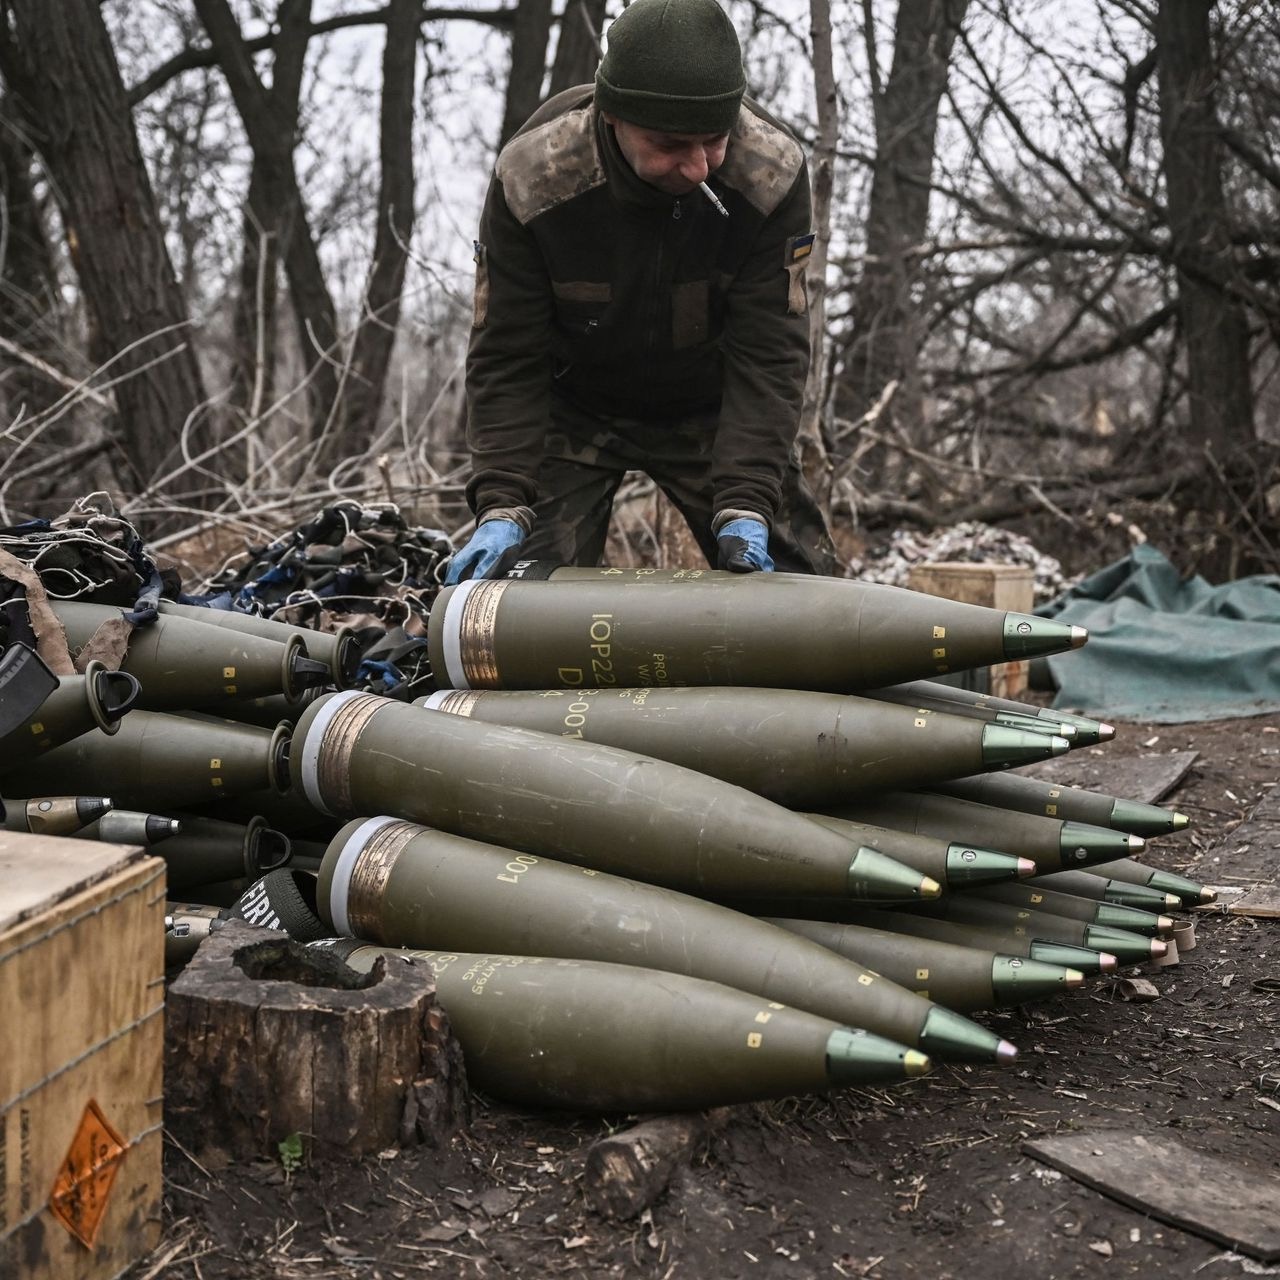 The United States says it has every indication that Ukraine is properly using cluster munitions on the battlefield, as reported